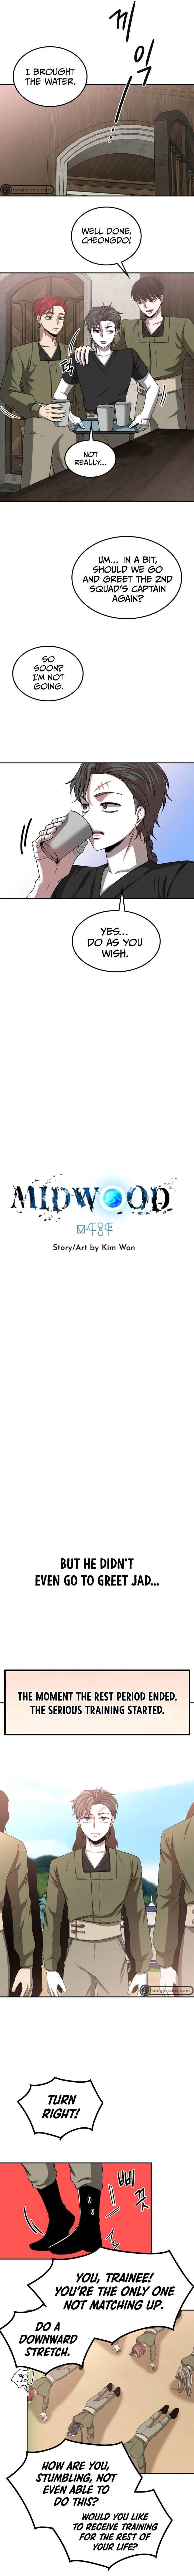 Midwood chapter 8 - page 3